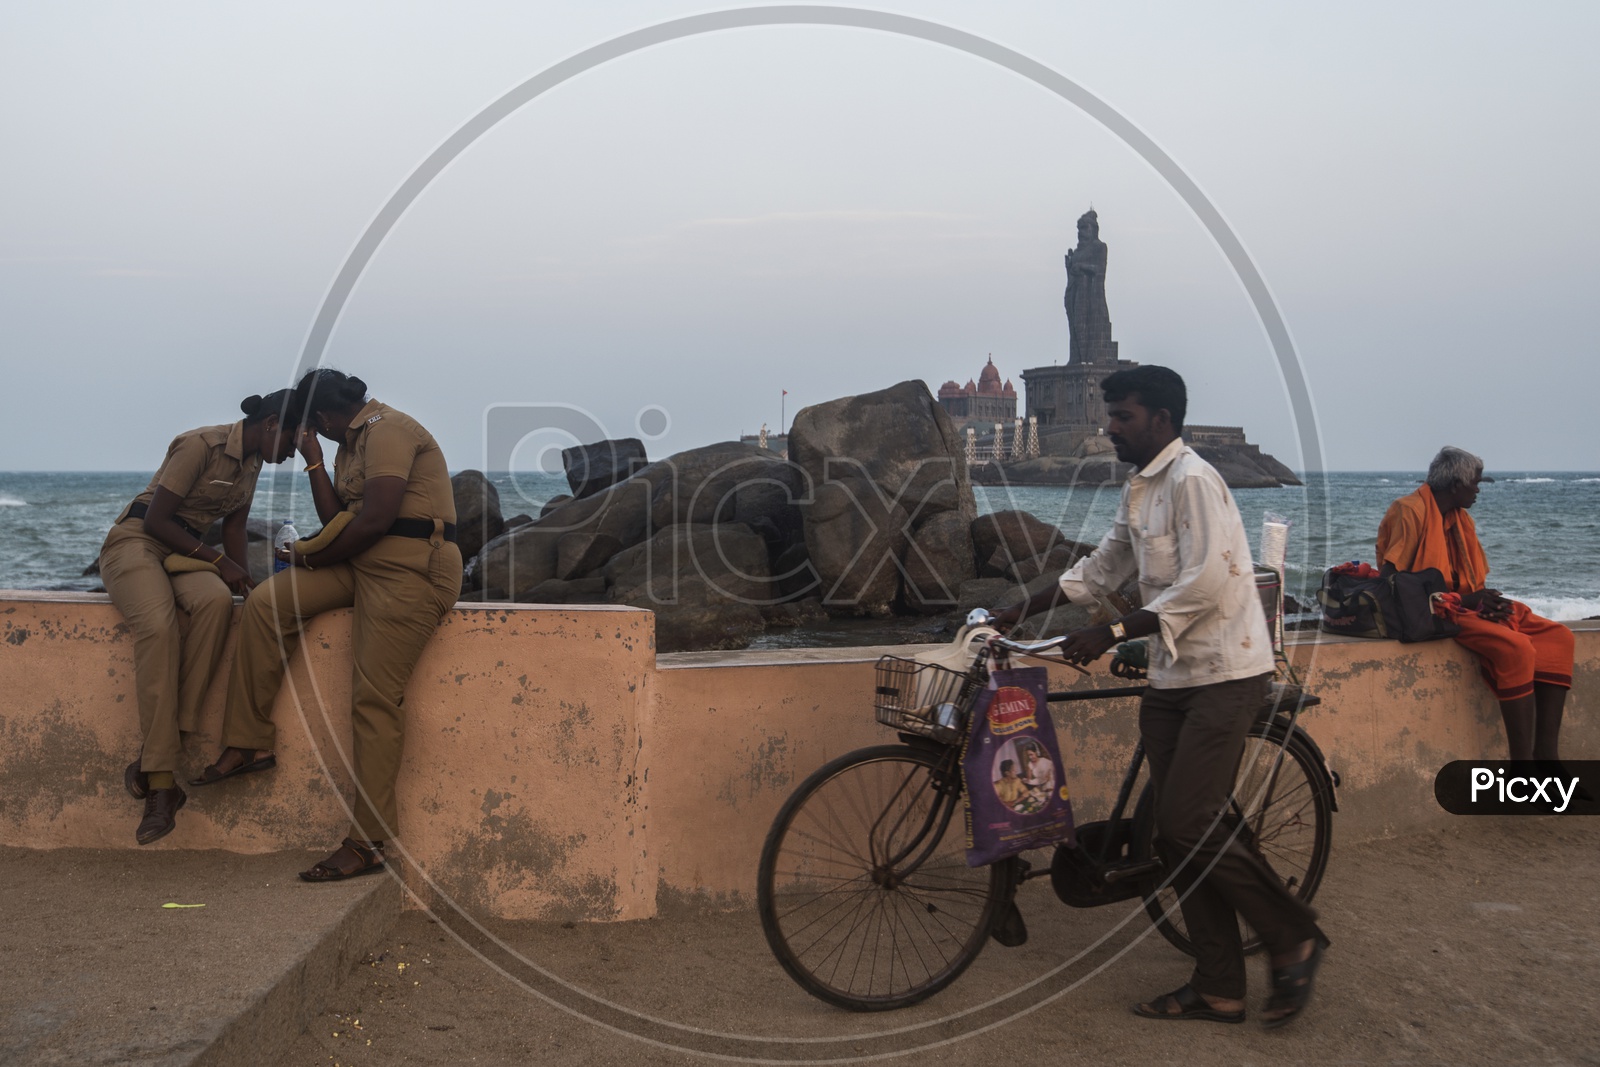 A man with a bicyle walking along the beach side. Indian women police.